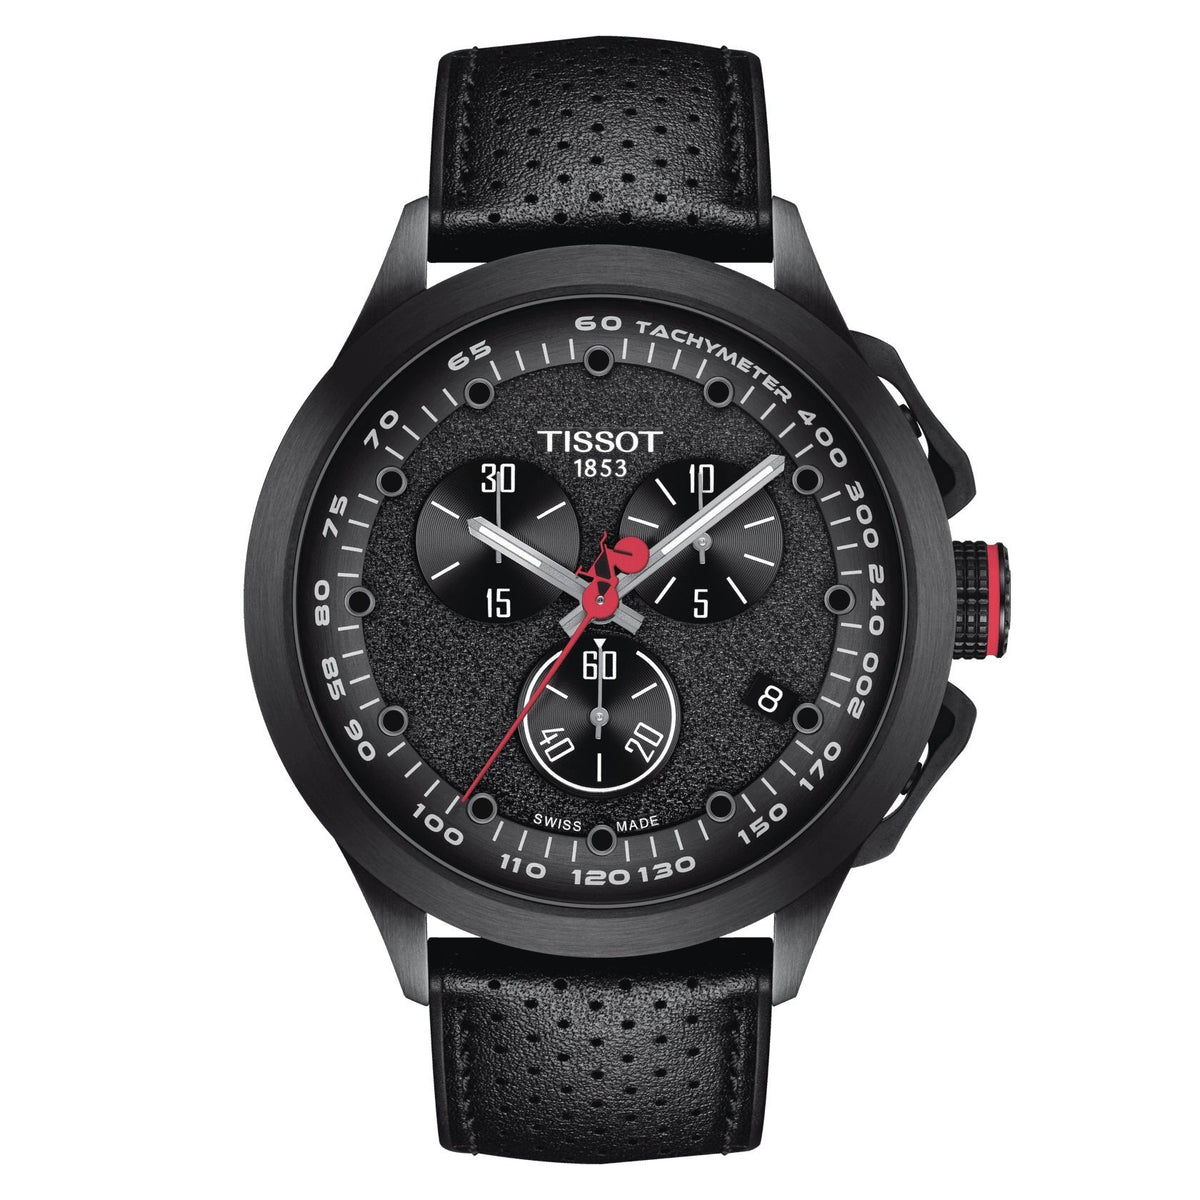 Tissot T-Race Cycling Giro d'Italia Special Edition T135.417.37.051.01